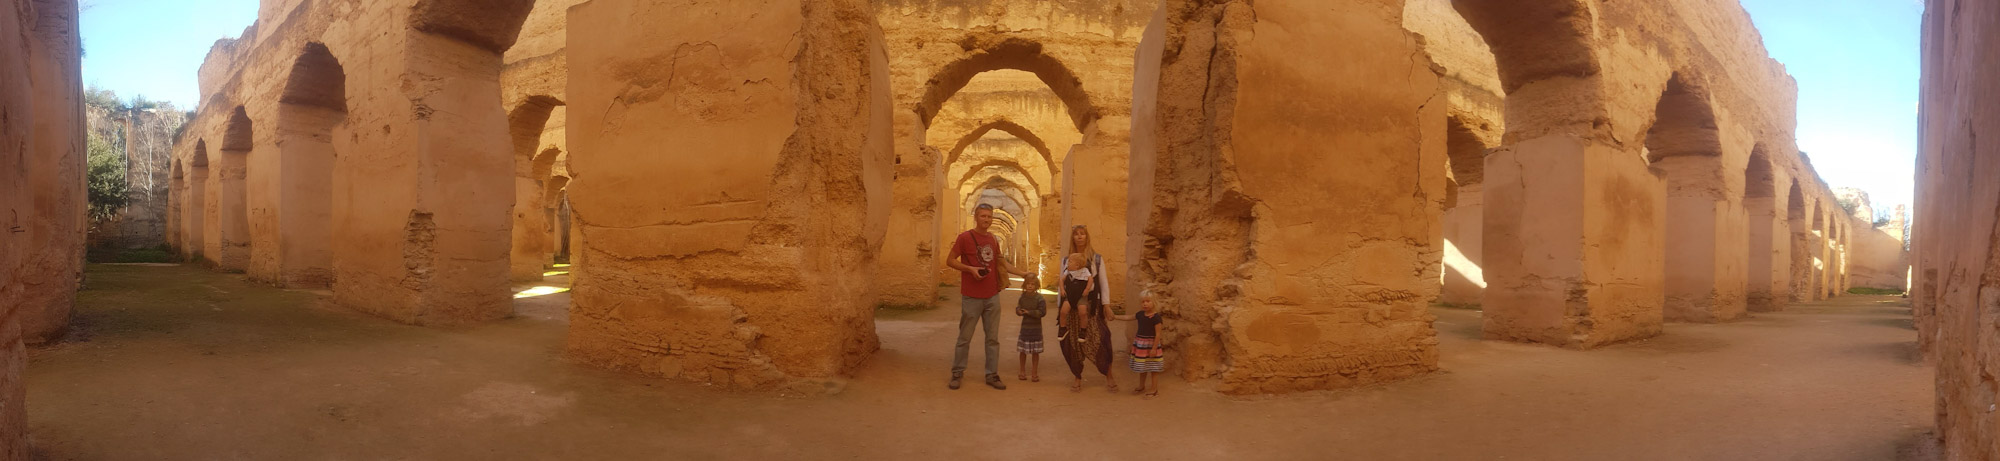 Family standing inside the ancient stables at Meknes, Morocco